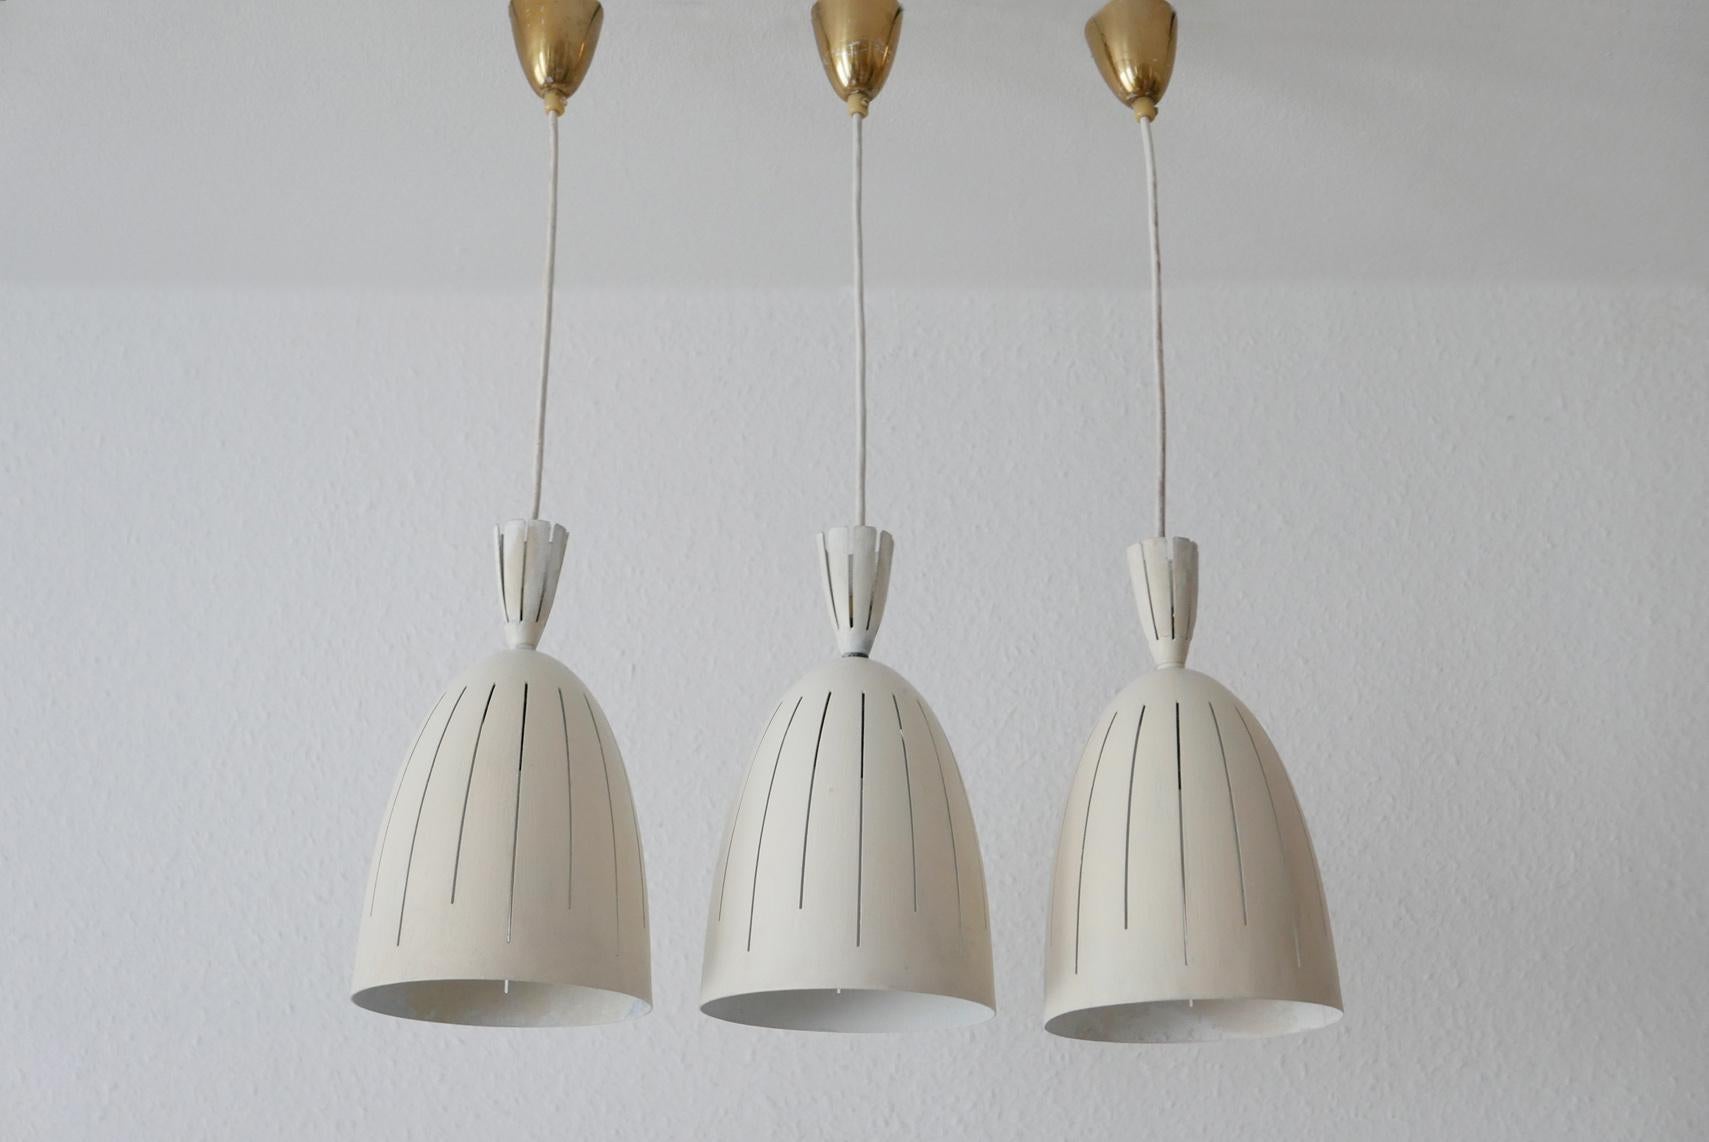 Set of Three Lovely Mid-Century Modern Diabolo Pendant Lamps, 1950s, Germany In Good Condition For Sale In Munich, DE